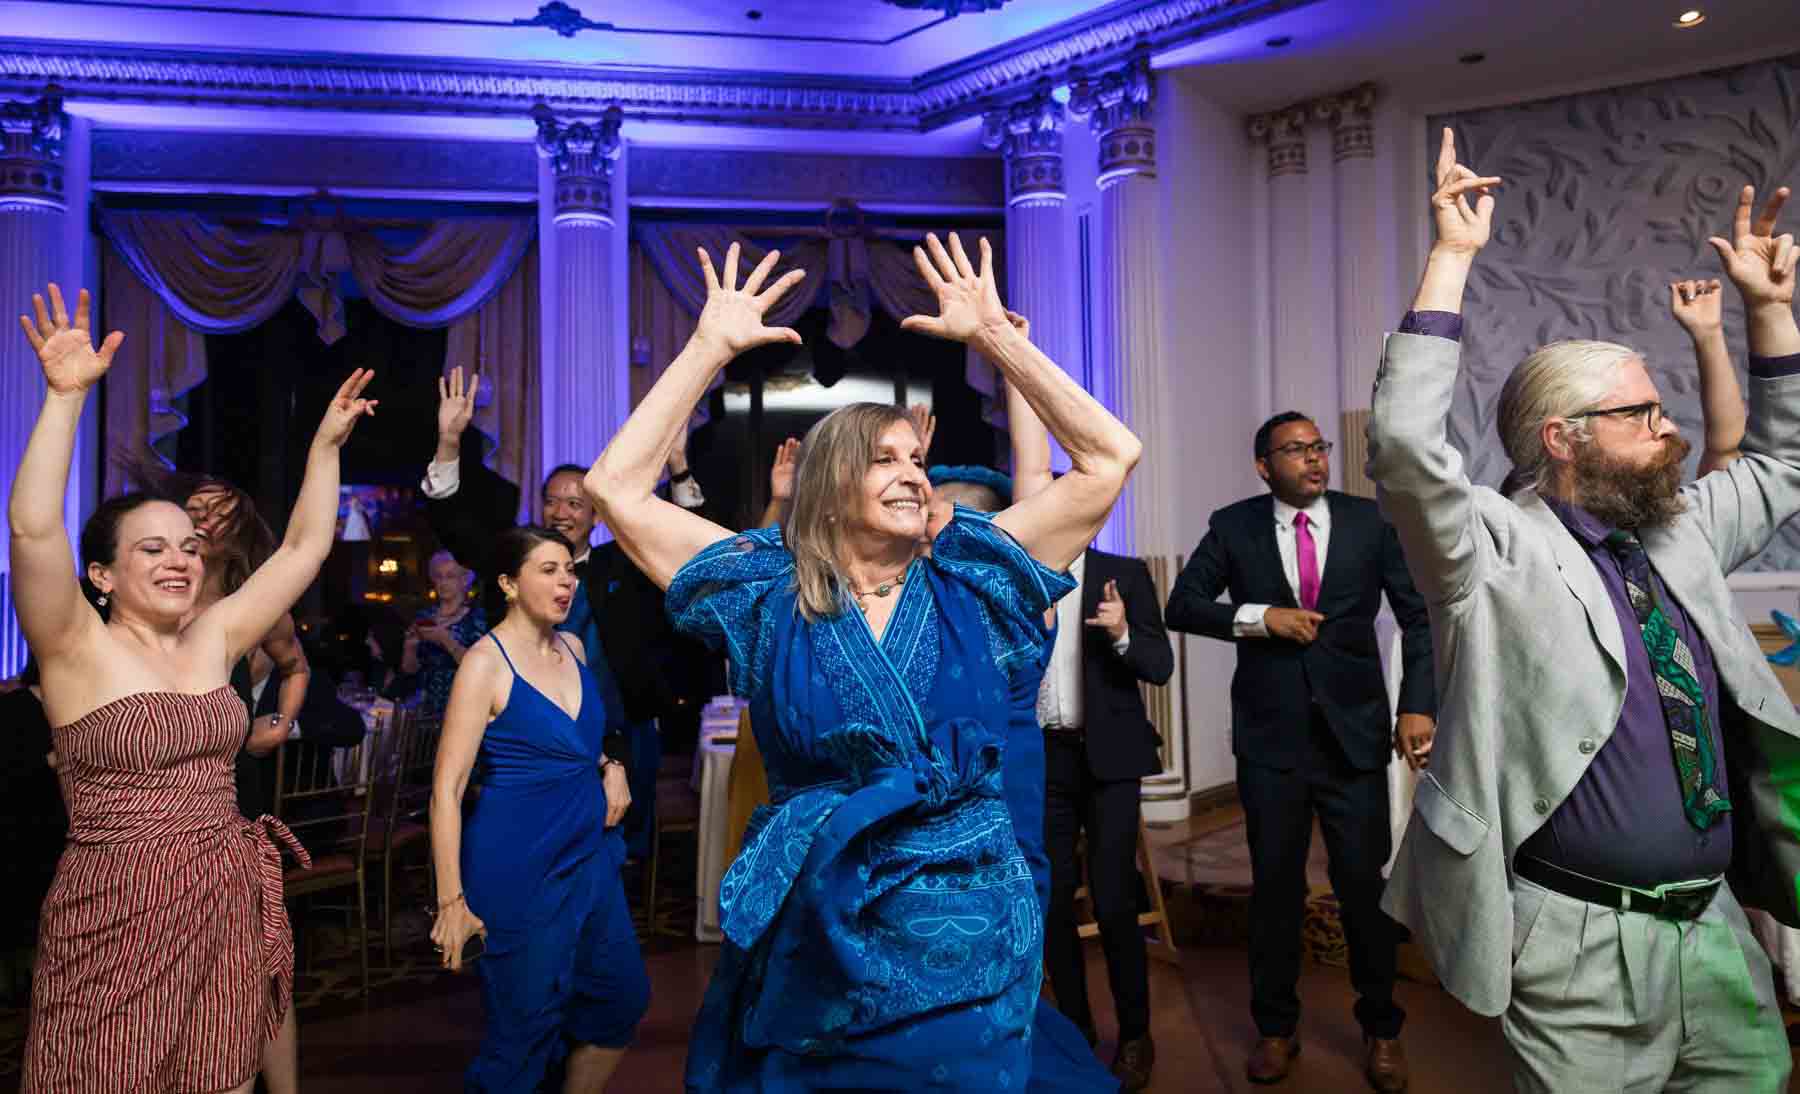 Guests dancing with arms raised at a Terrace on the Park wedding